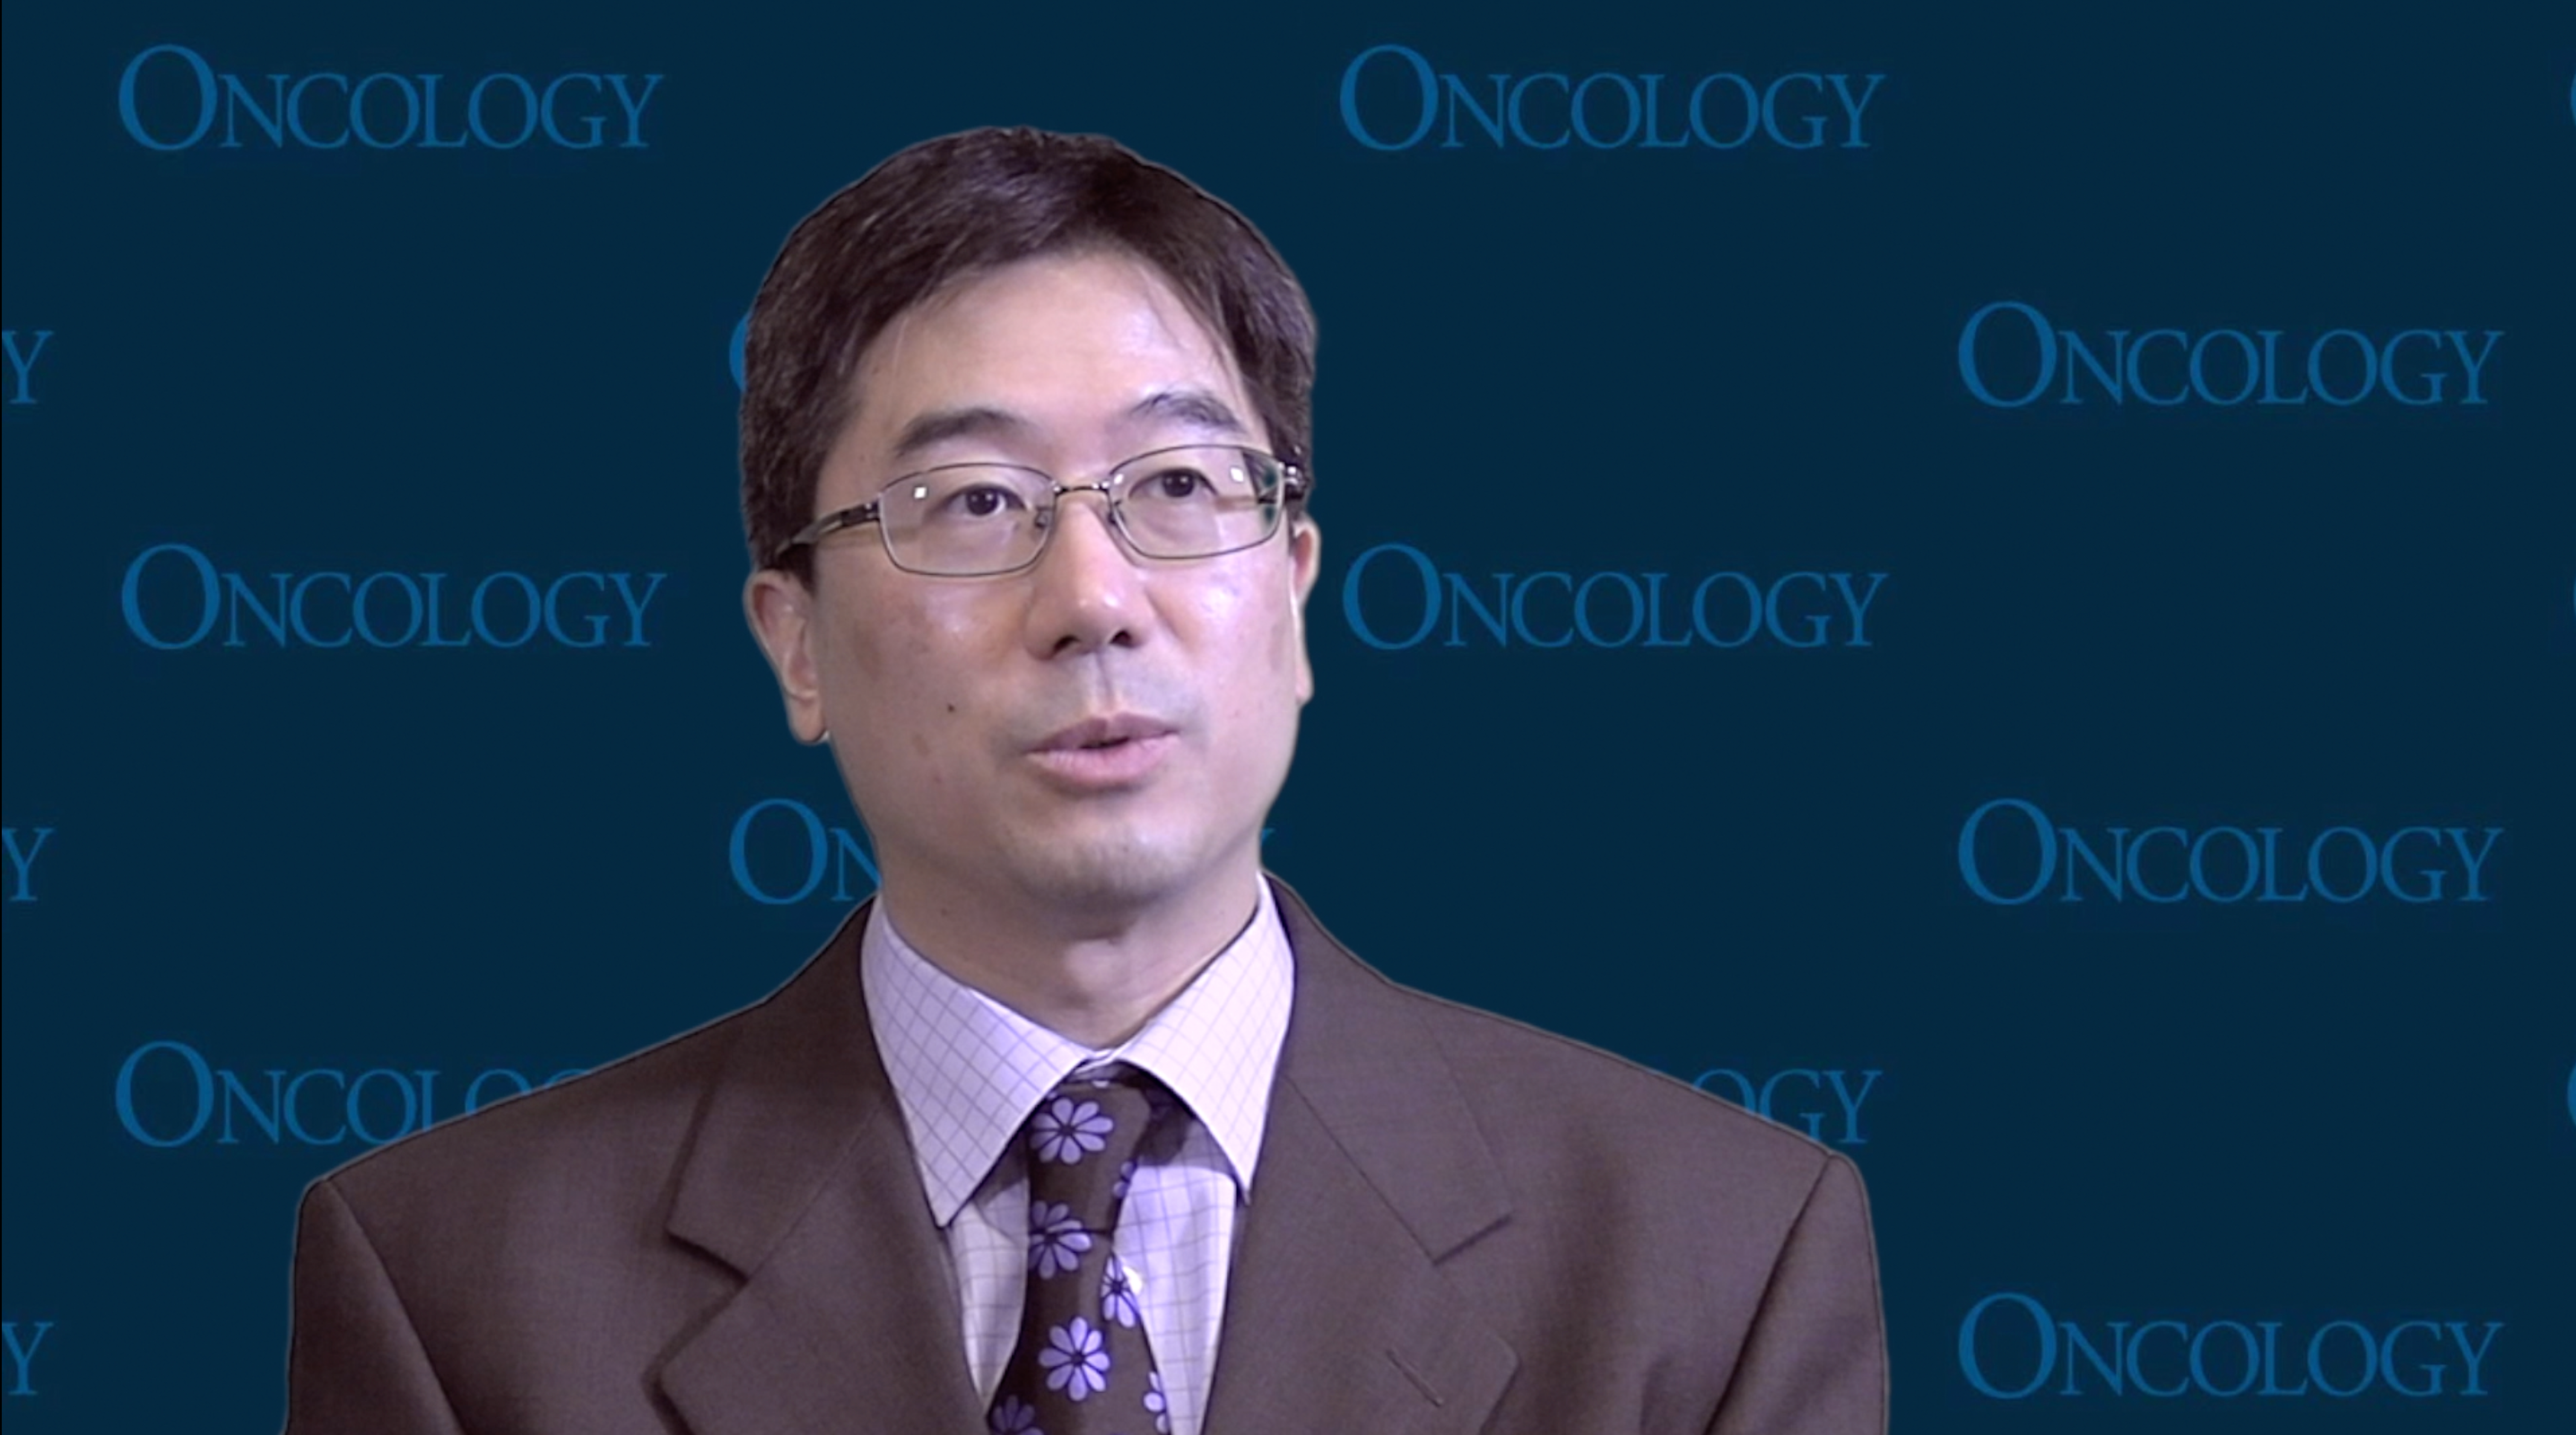 Phillip H. Kuo, MD, PhD, Reviews Rationale of Phase 3 VISION Trial of 177Lu-PSMA-617 in mCRPC